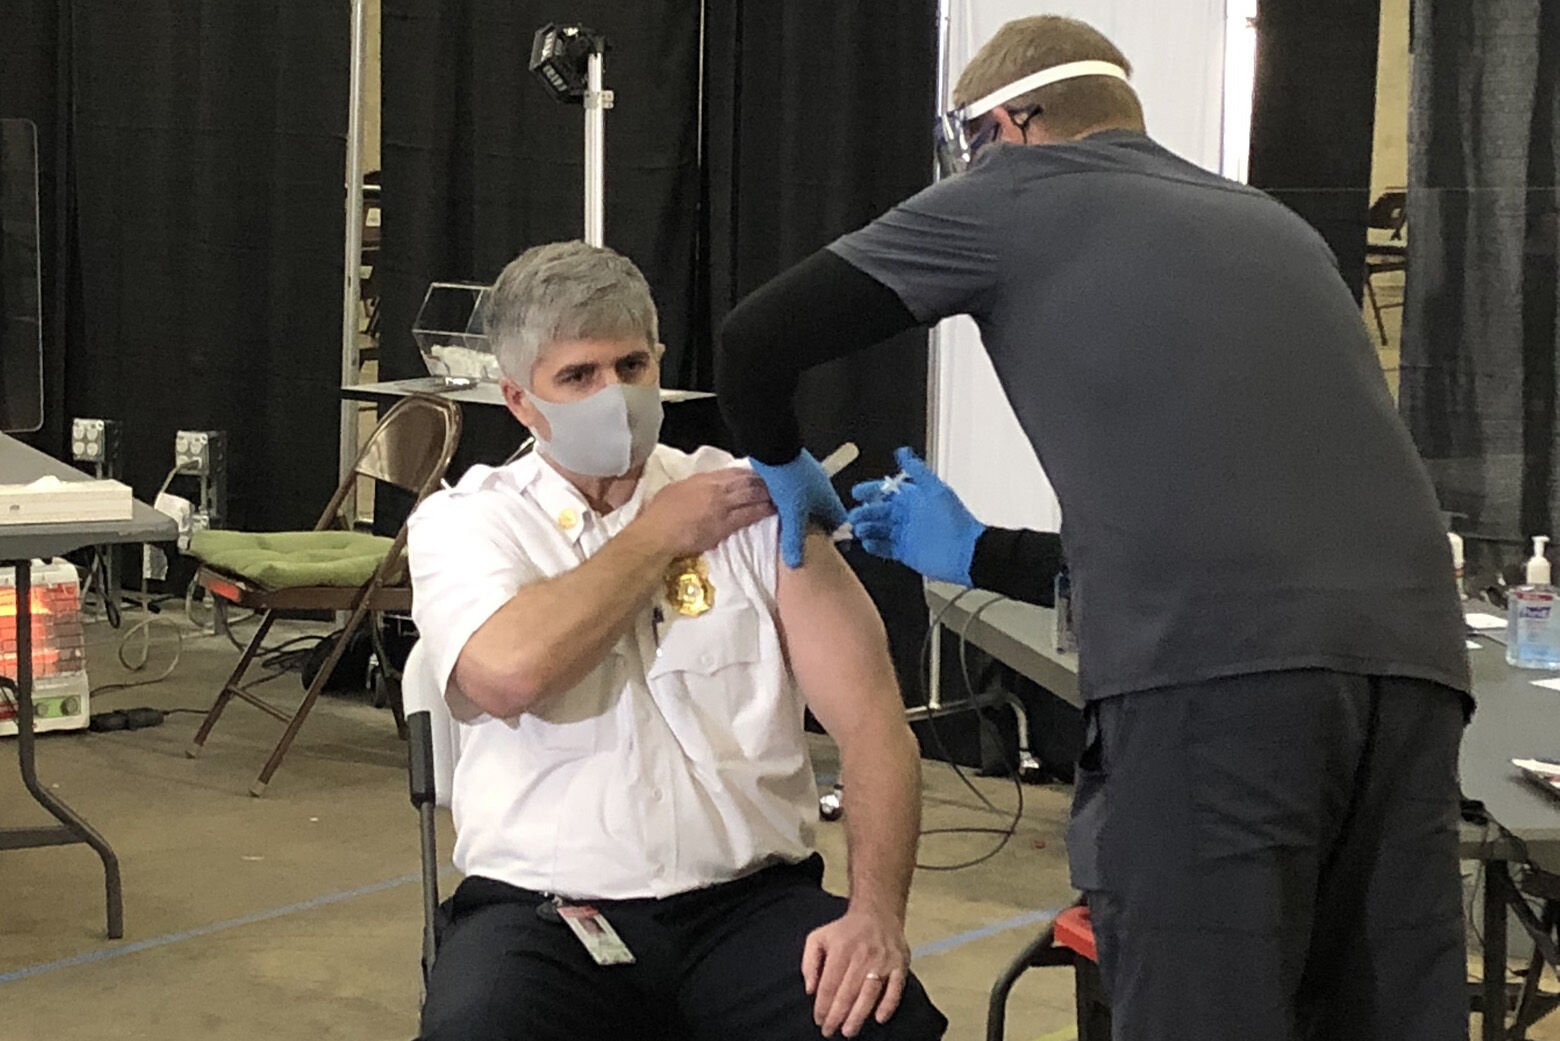 James Williams, assistant chief of operations for Loudoun County Fire and Rescue, receives the Moderna coronavirus vaccine Monday in Sterling.